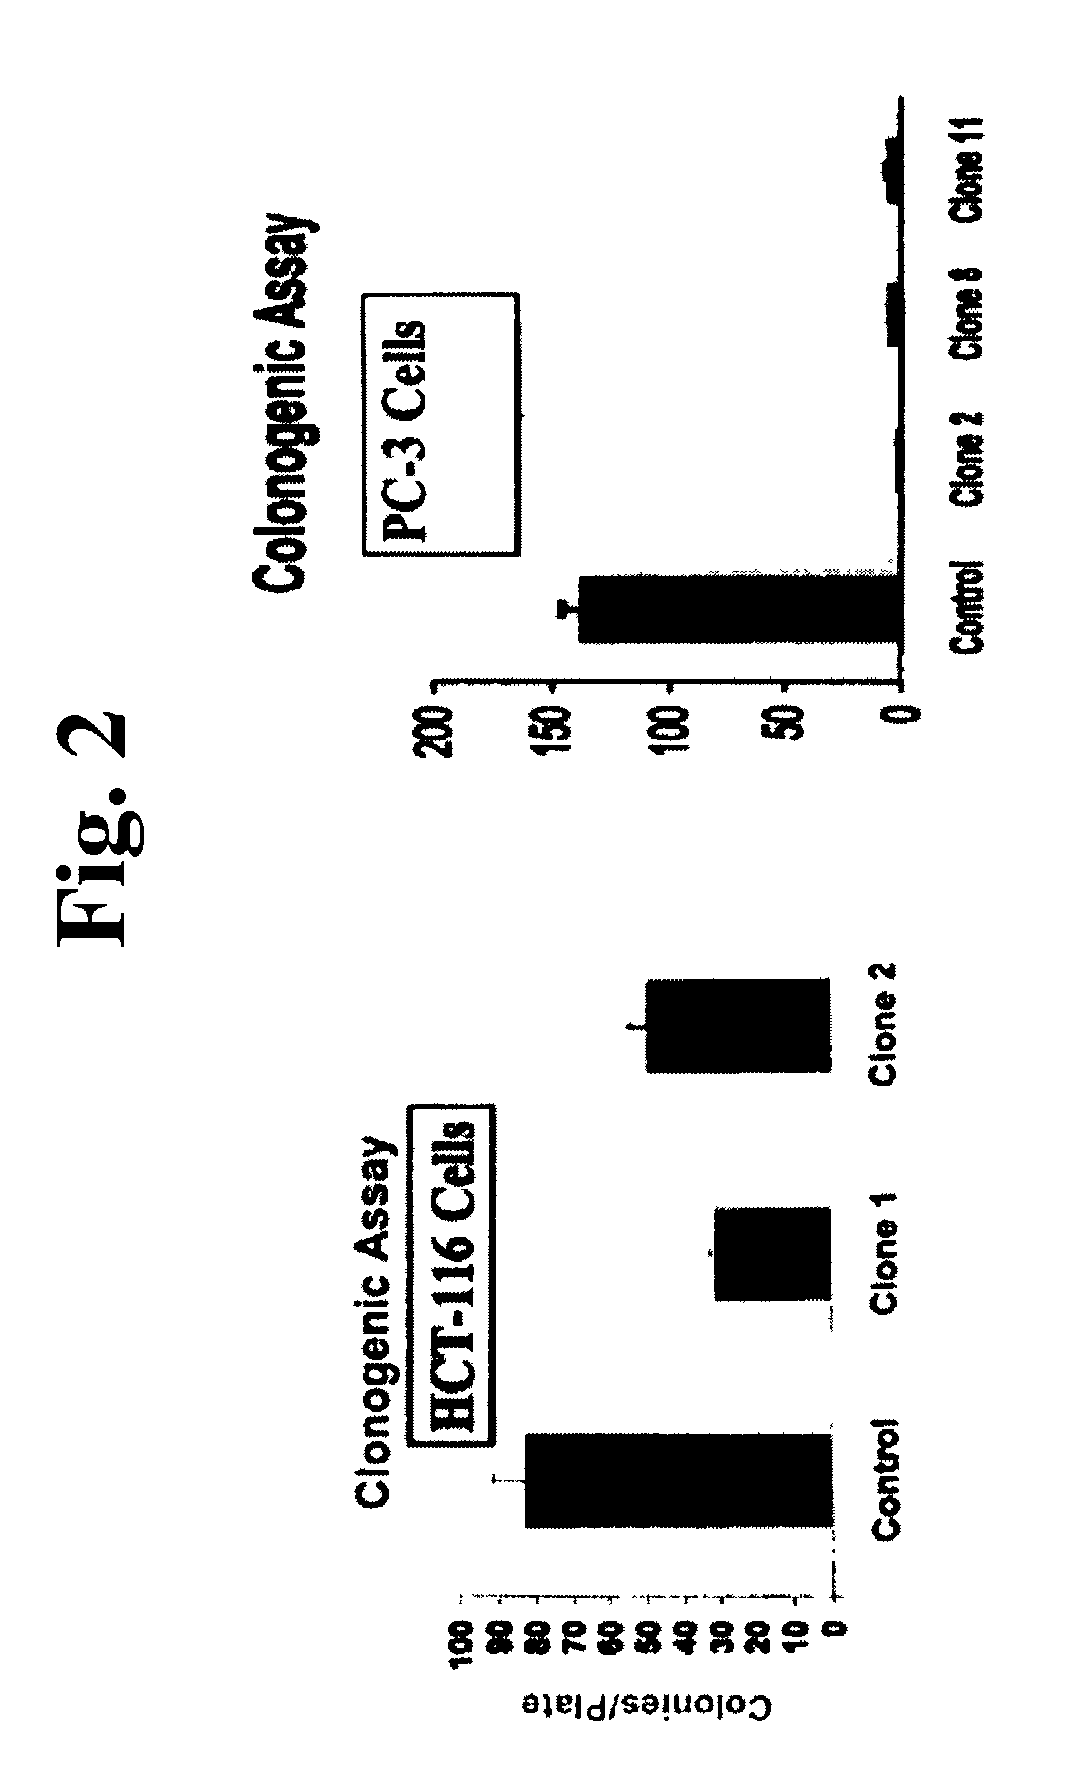 Antibodies to a novel EGF-receptor related protein (ERRP)